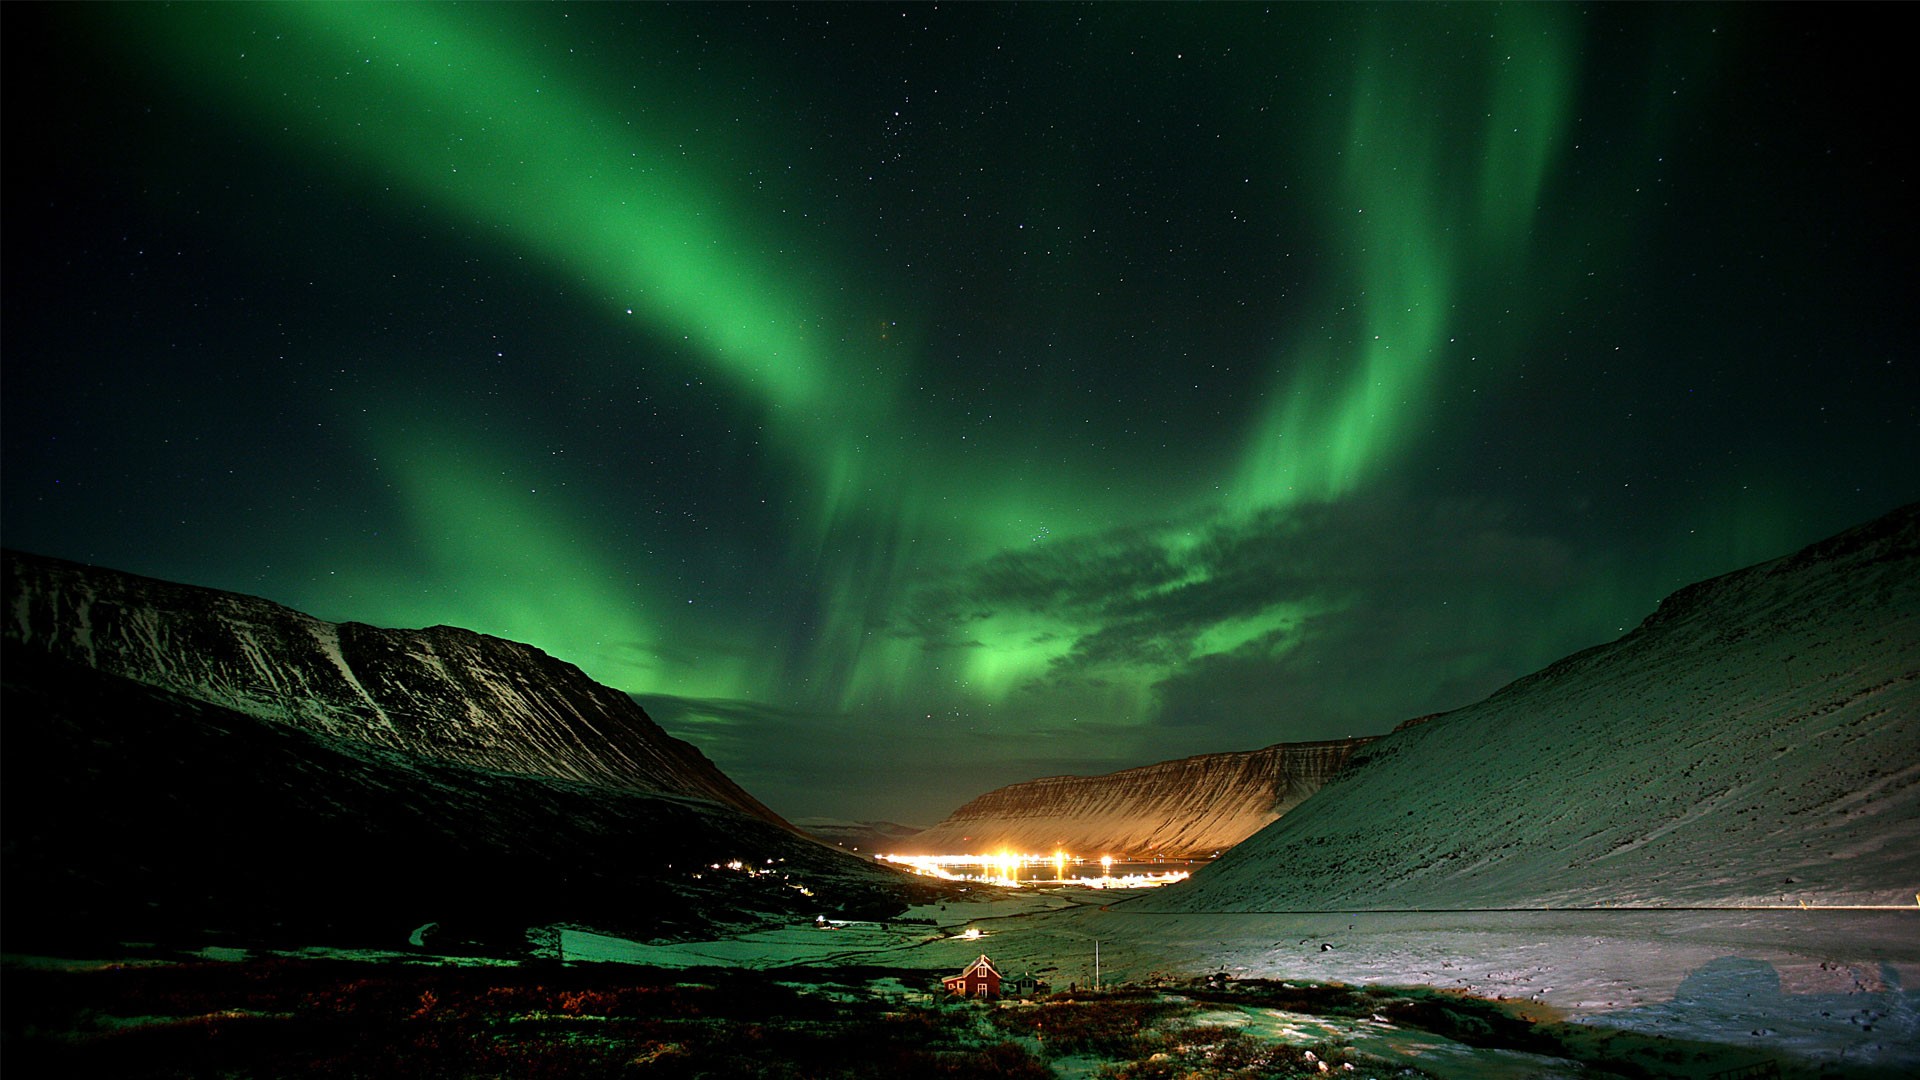 General 1920x1080 aurorae sky nature Norway mountains green stars nordic landscapes